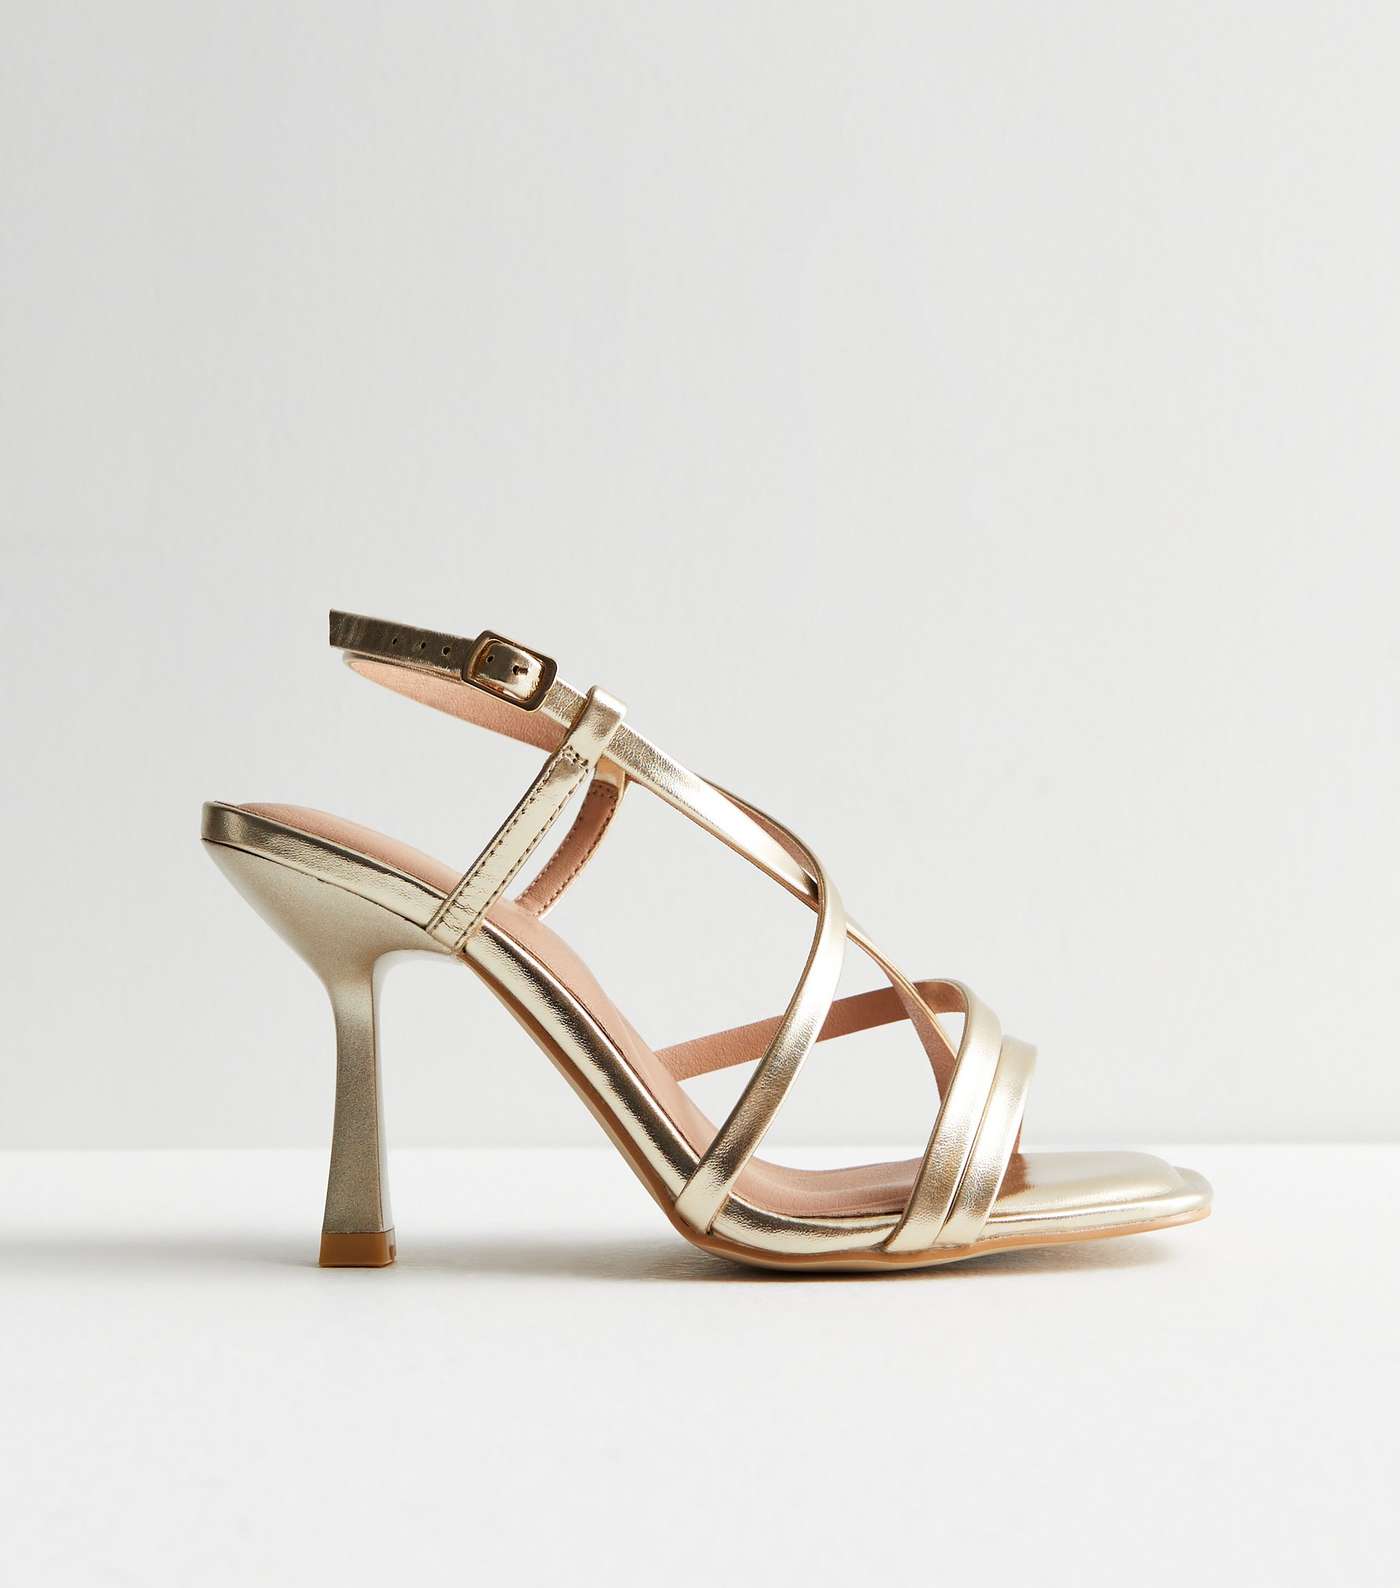 Extra Wide Fit Gold Strappy Stiletto Heel Sandals